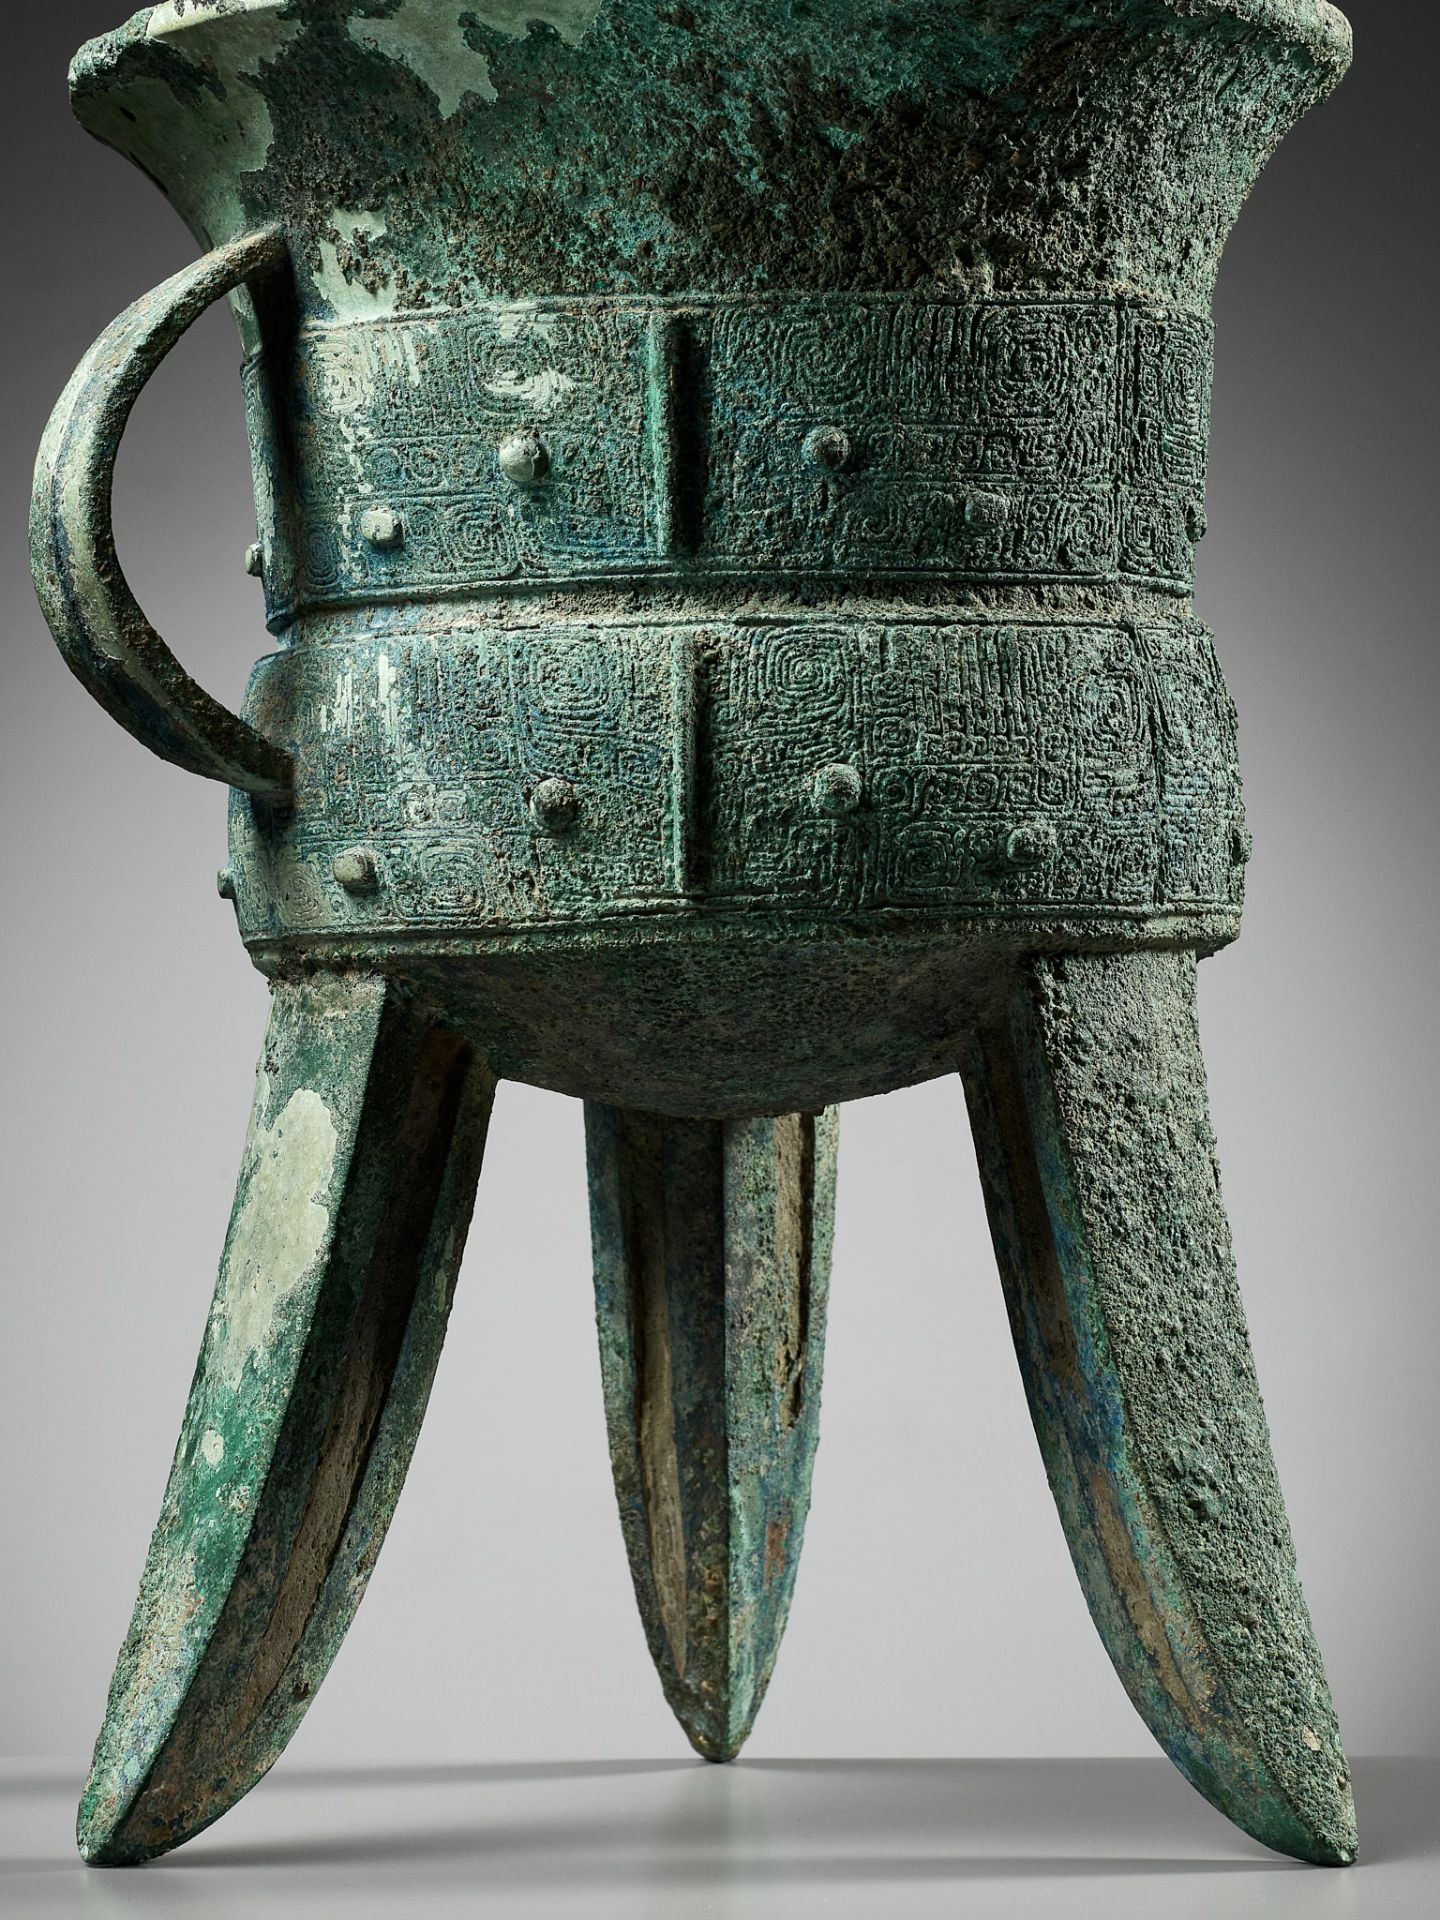 AN EXCEPTIONALLY LARGE AND MASSIVE BRONZE RITUAL TRIPOD WINE VESSEL, JIA, WITH A CLAN MARK, SHANG - Image 17 of 29